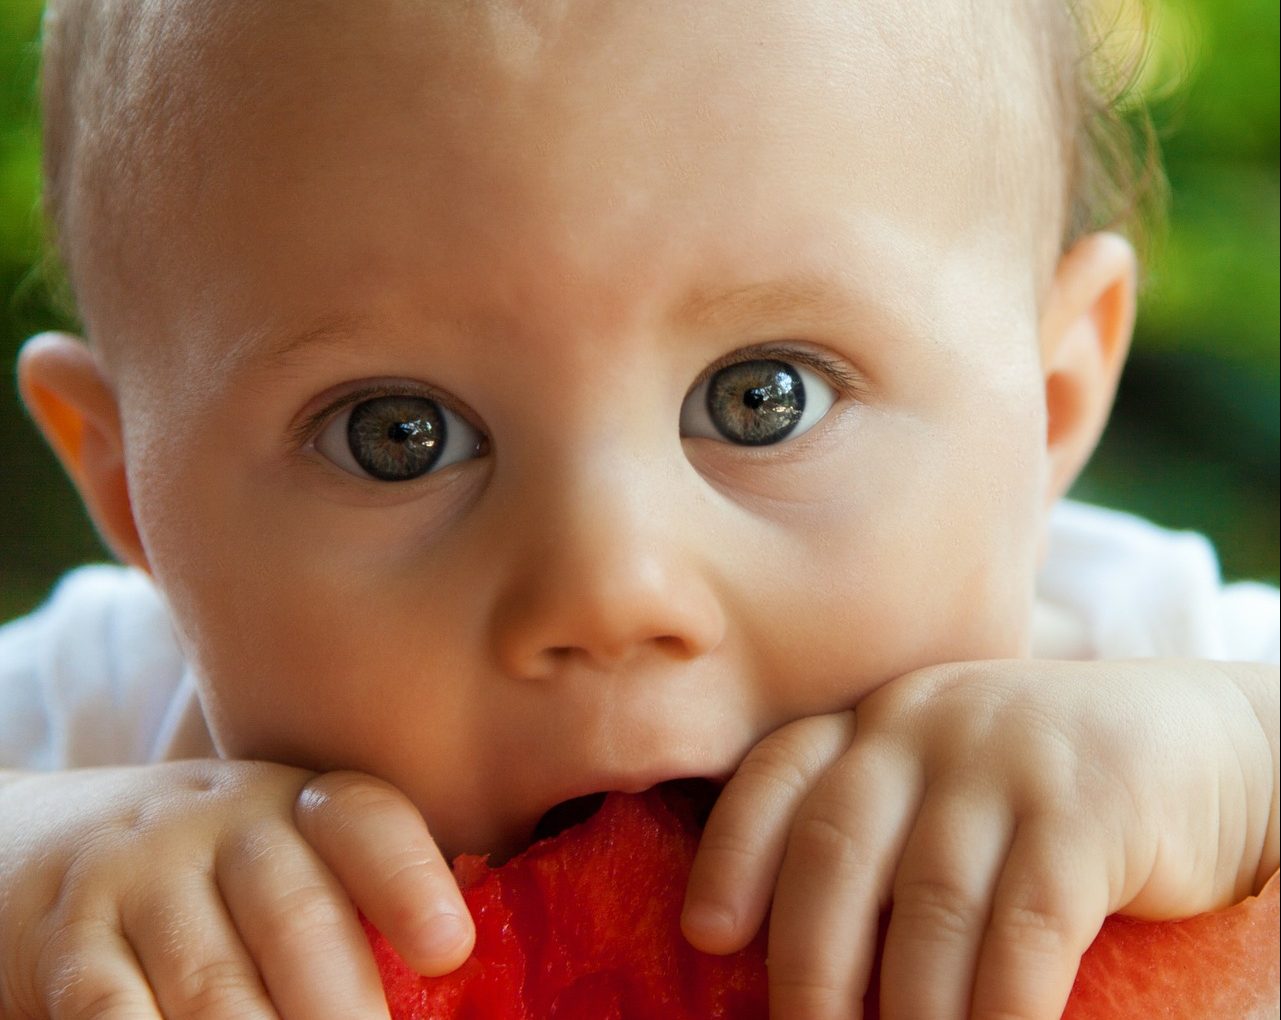 My Toddler Won't Eat Healthy Foods! HELP!